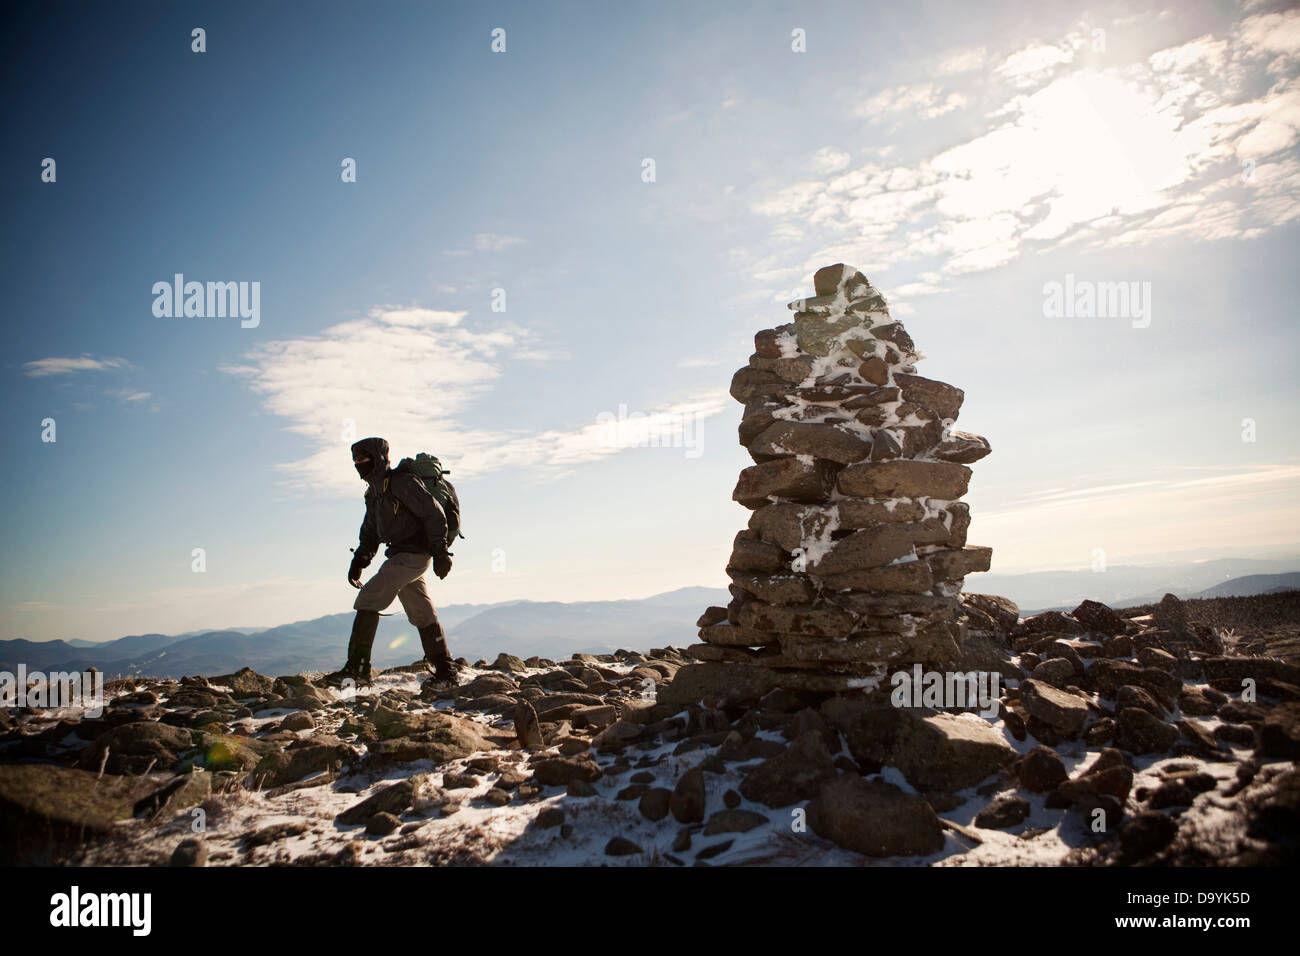 A mountaineer walks past a cairn on his way to the summit of Mount Moosilauke in the White Mountains of New Hampshire. Stock Photo